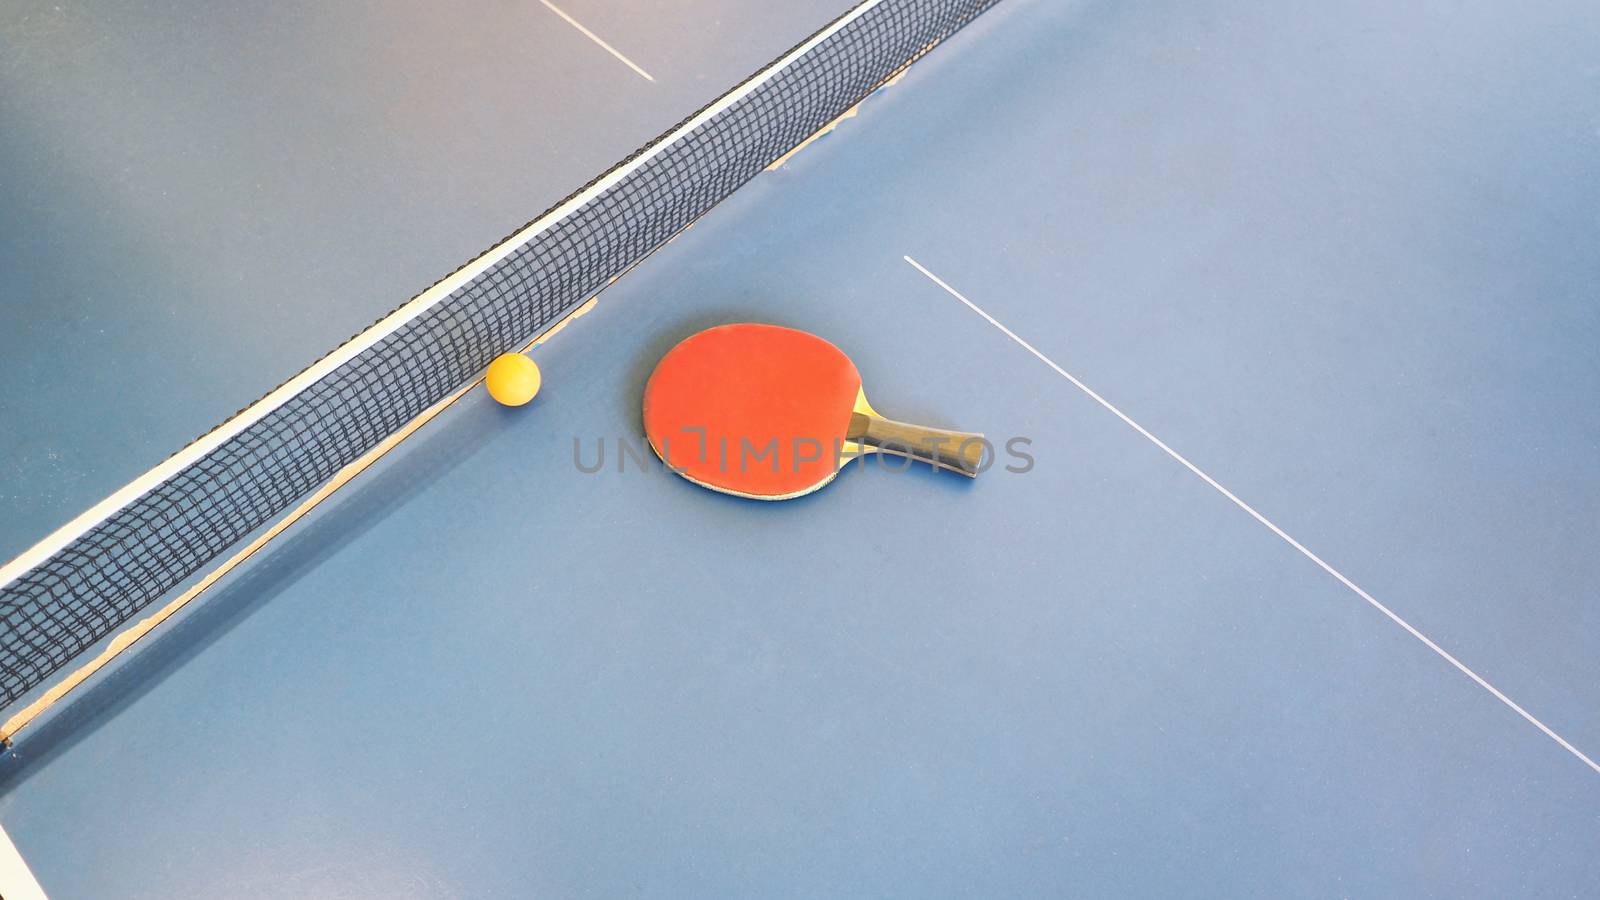 Top view of table tennis or ping-pong table with red and black color wood racket and yellow ball.